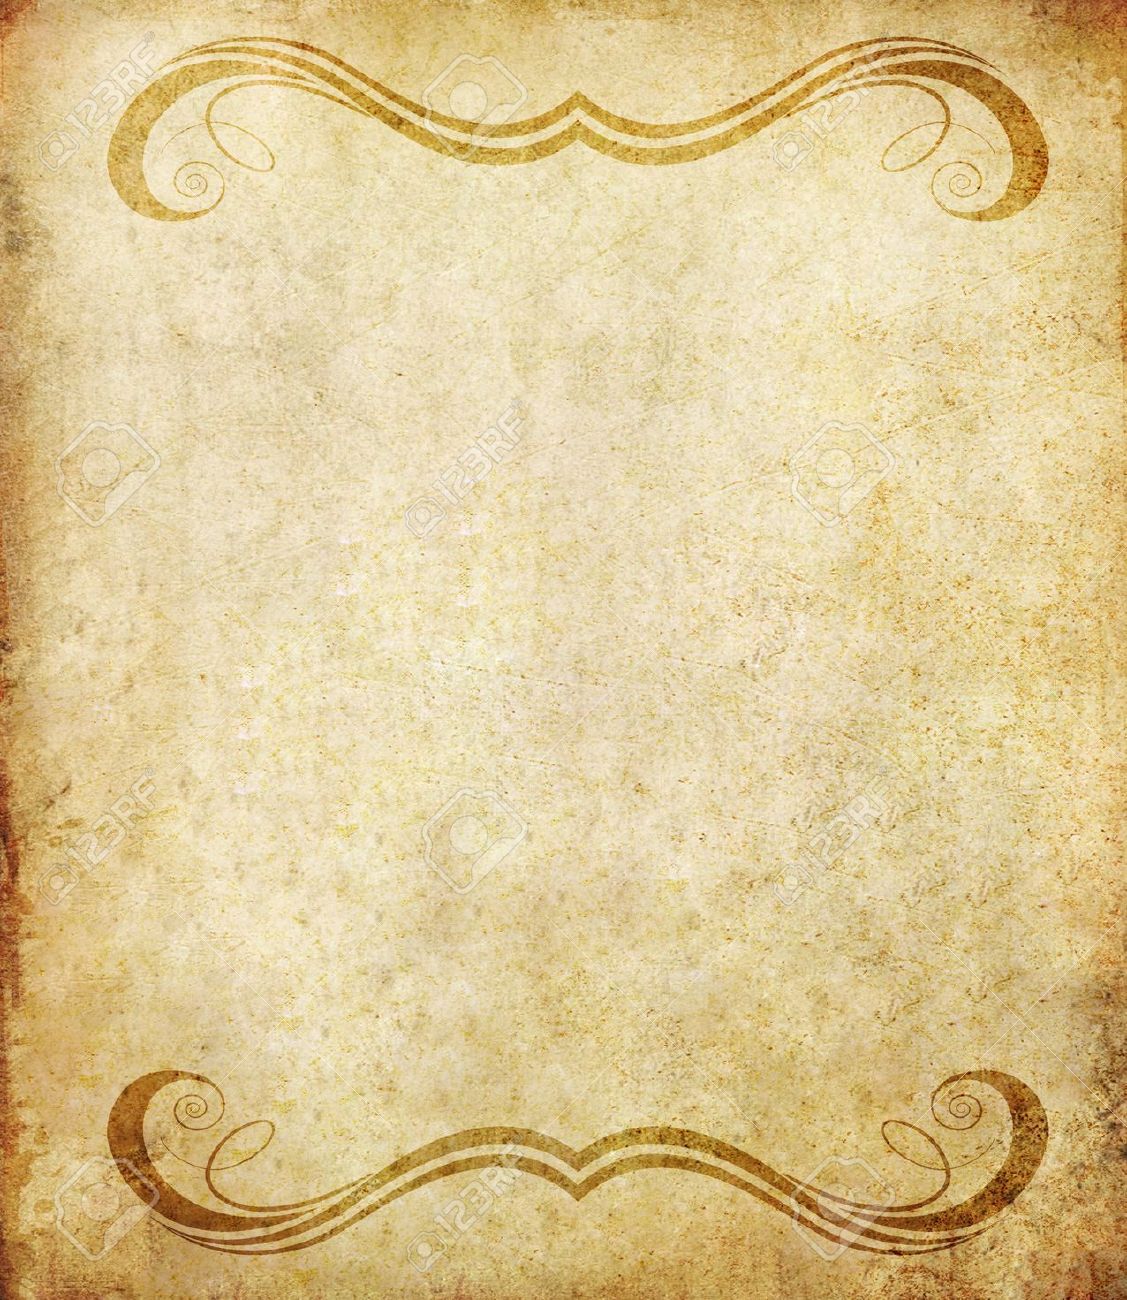 Old Grunge Paper Background With Vintage Style Stock Photo